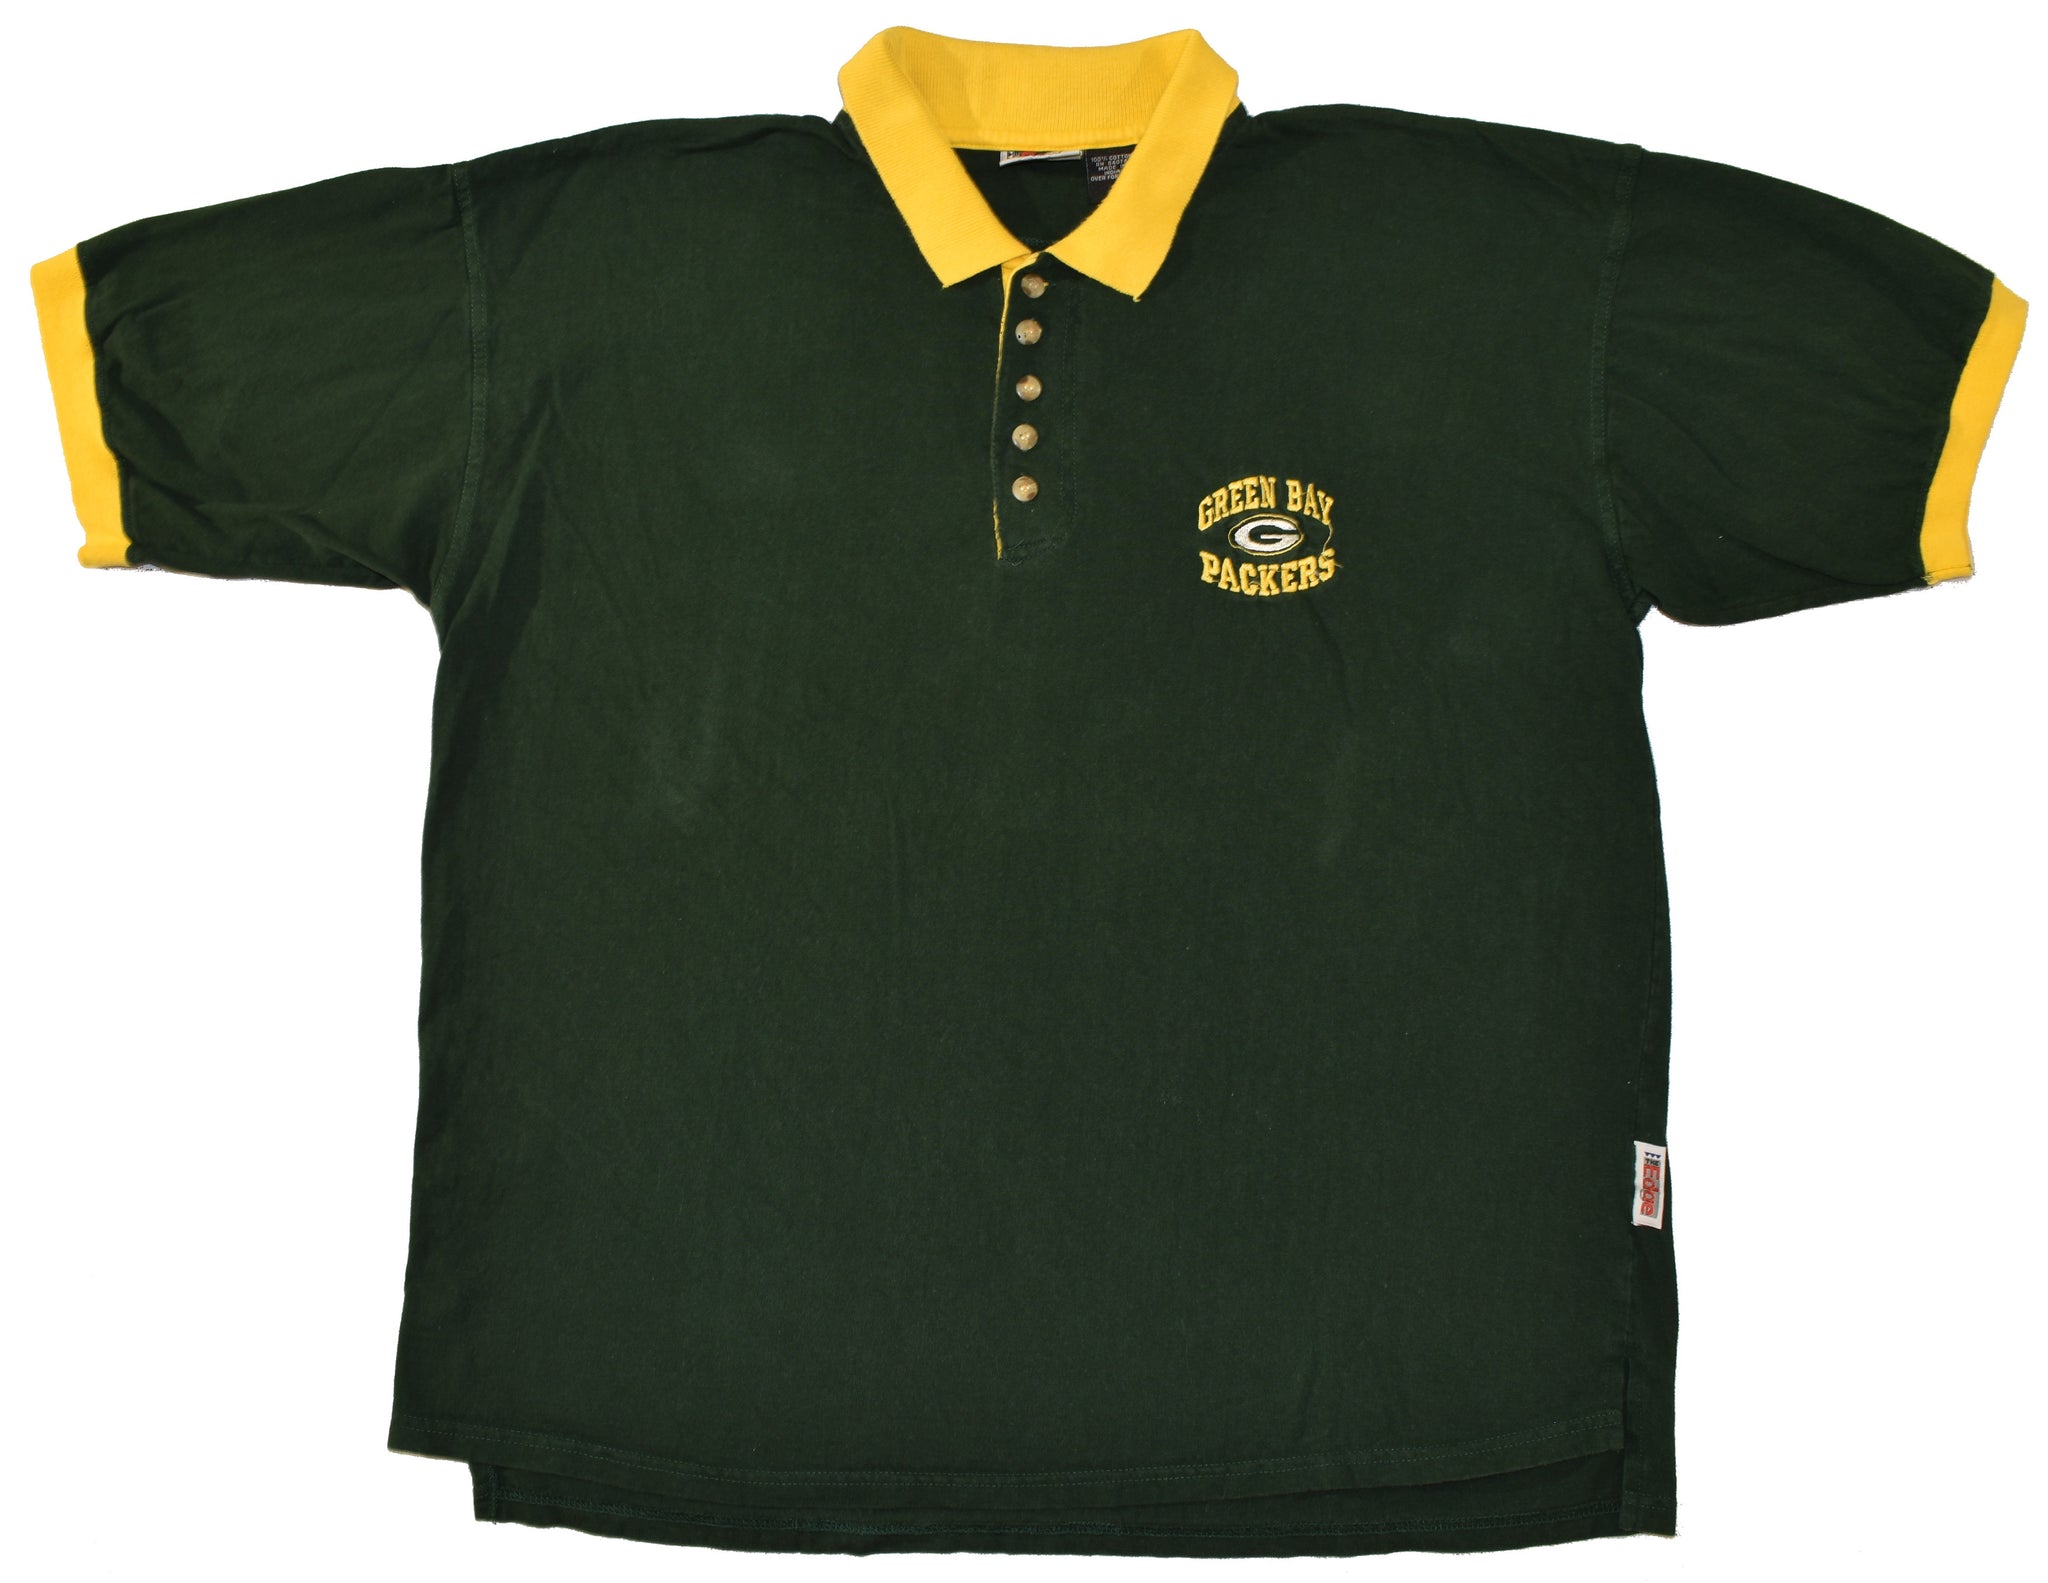 1997 Green Bay Packers Polo Shirt Size X-Large